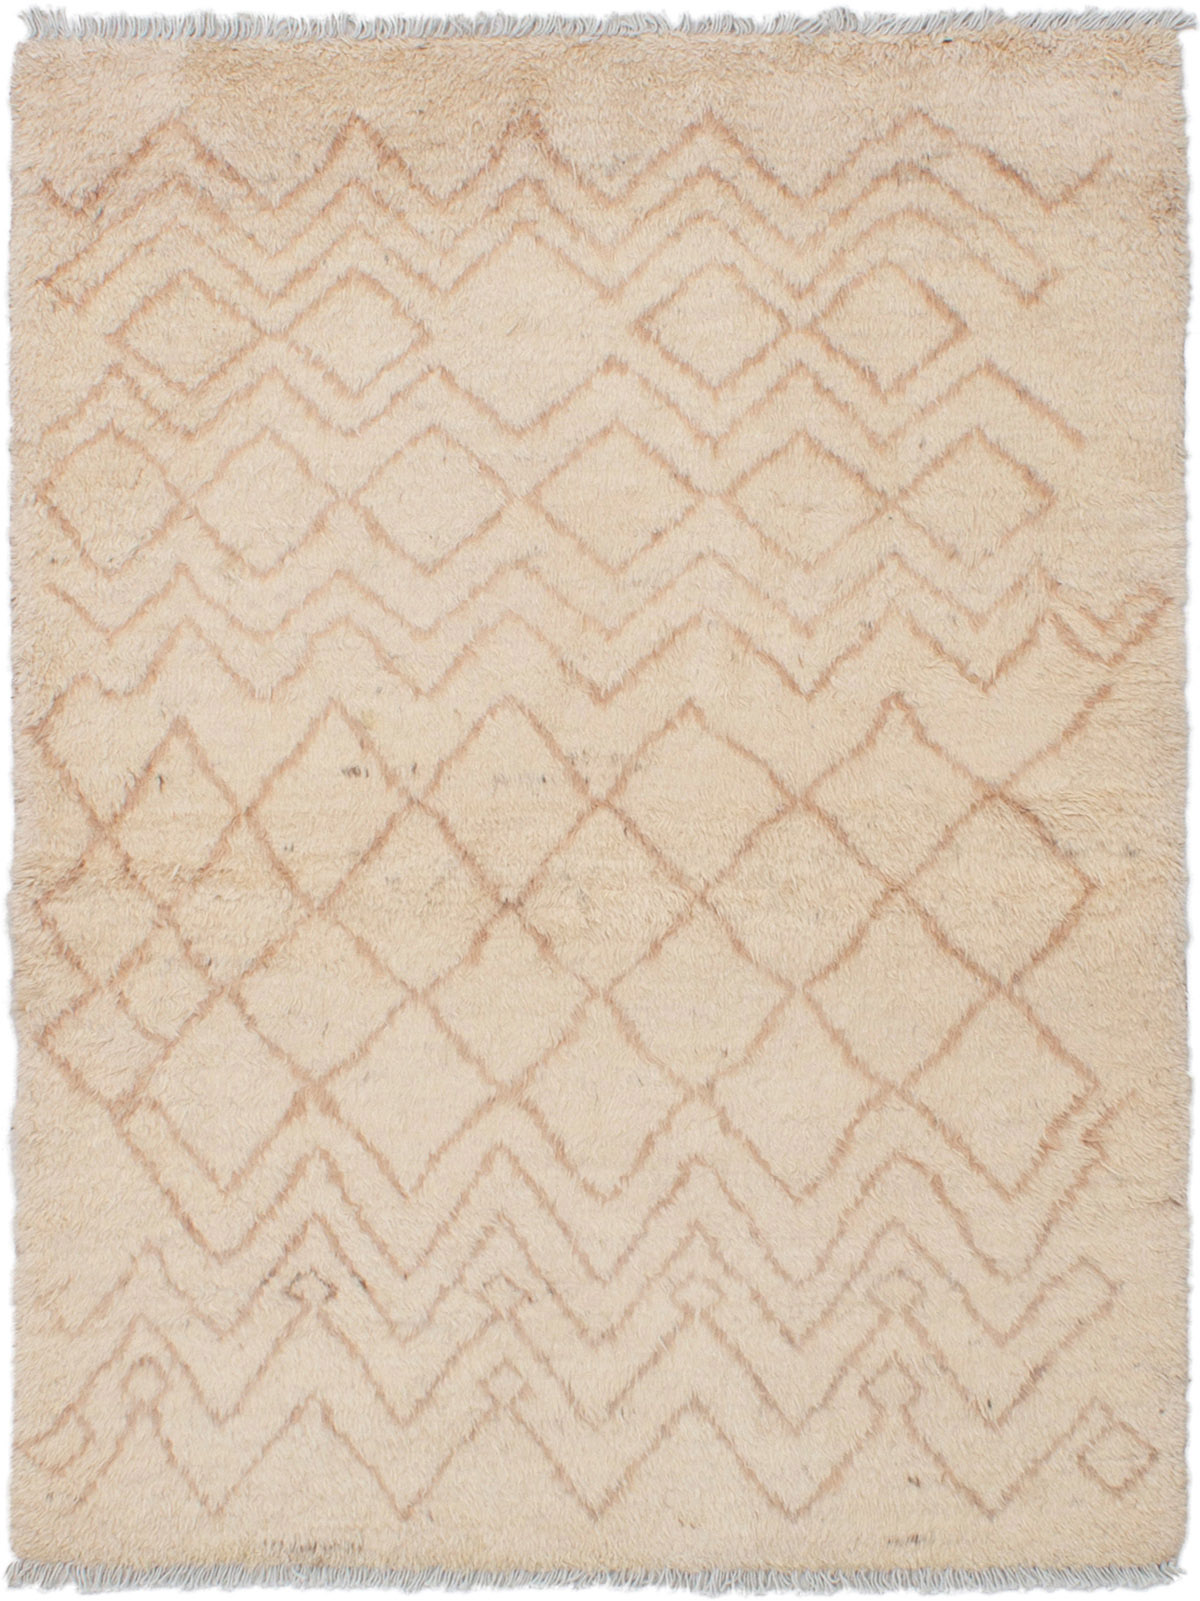 Hand-knotted Tangier Cream Wool Rug 4'7" x 6'1" Size: 4'7" x 6'1"  